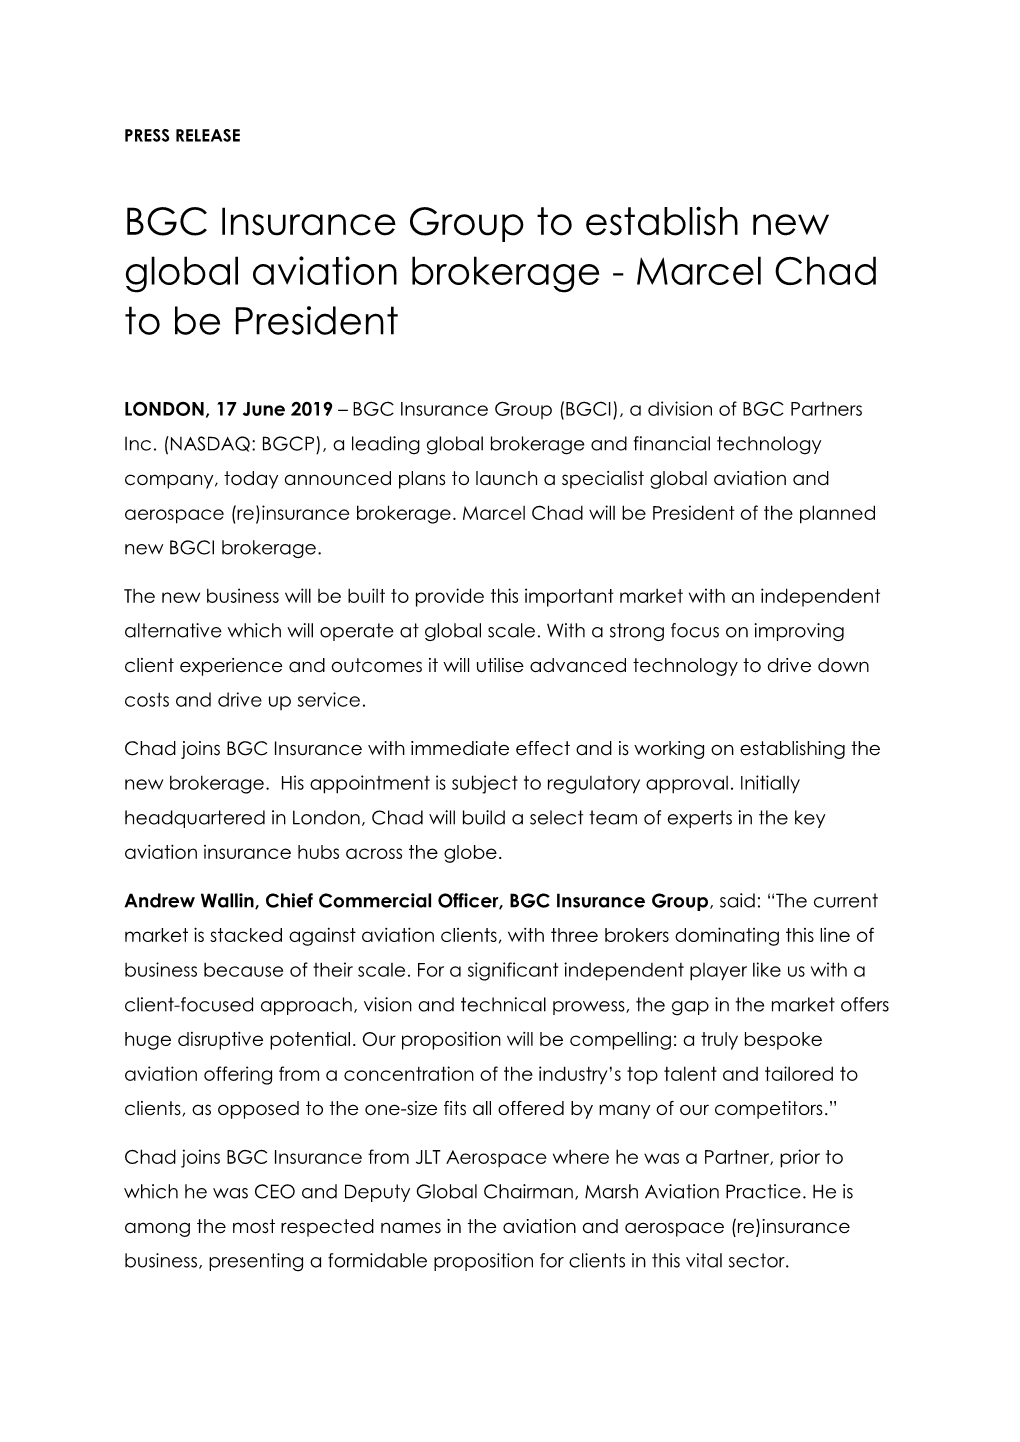 BGC Insurance Group to Establish New Global Aviation Brokerage - Marcel Chad to Be President